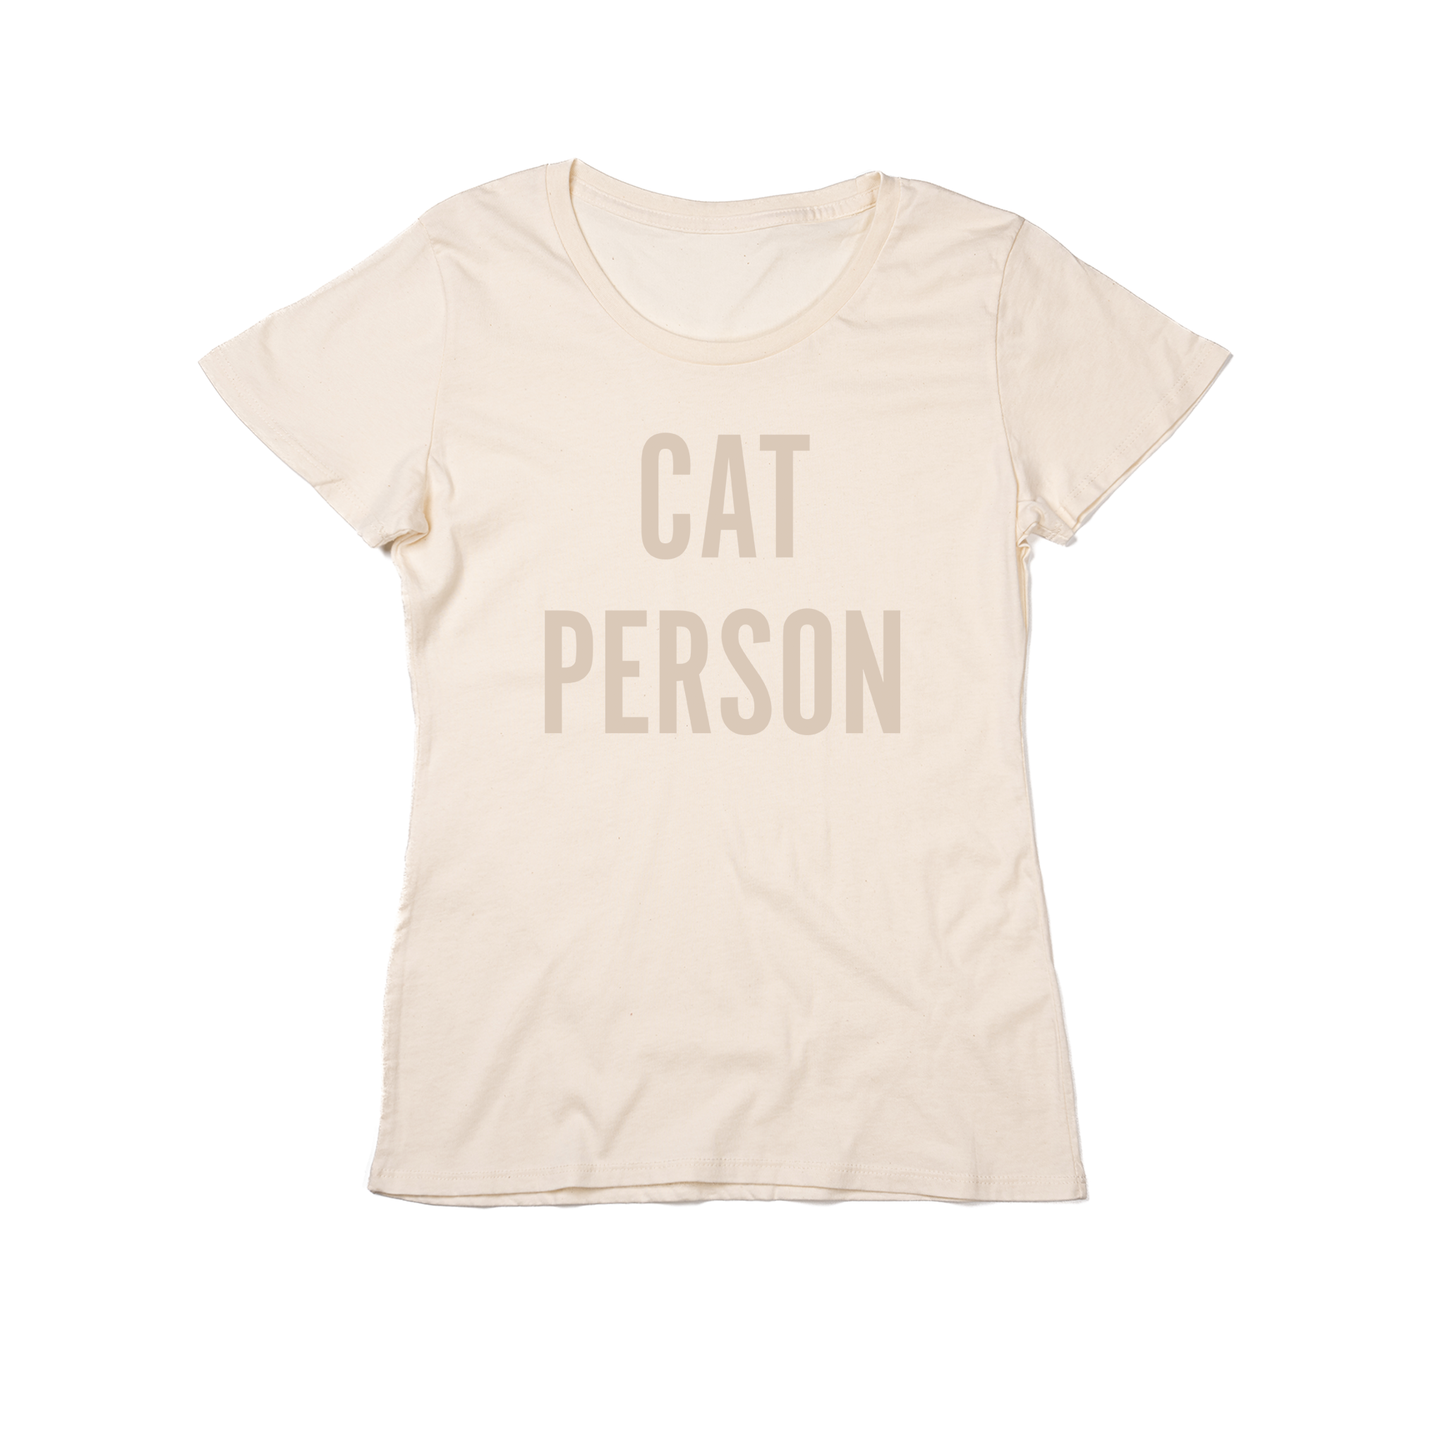 Cat Person (Stone) - Women's Fitted Tee (Natural)